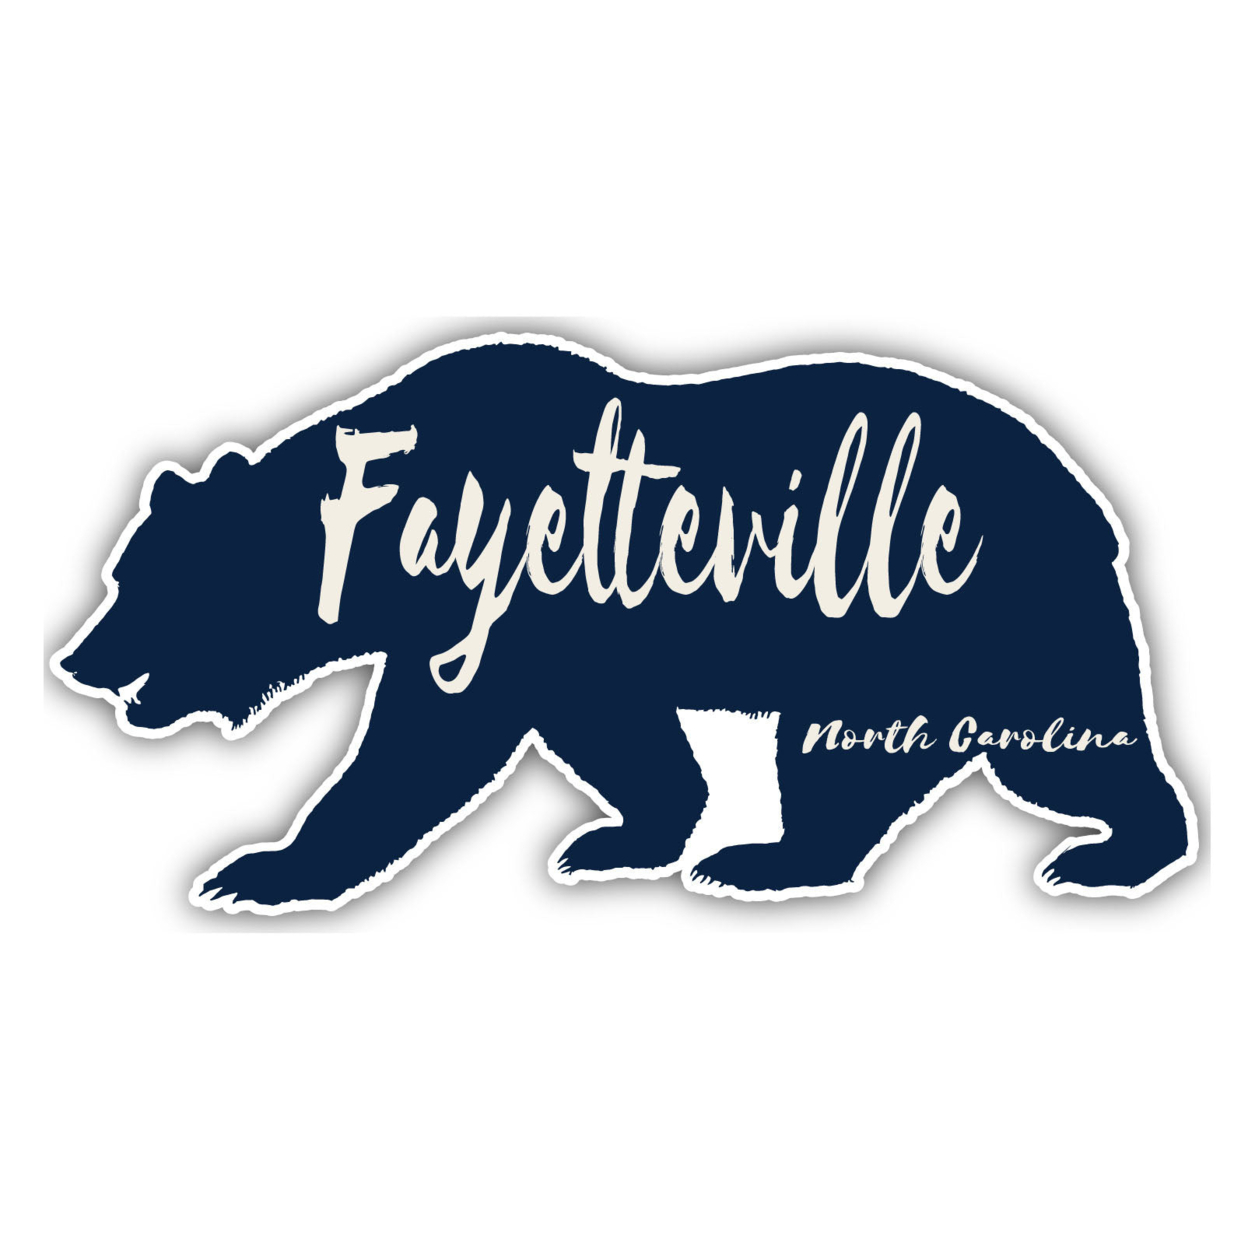 Fayetteville North Carolina Souvenir Decorative Stickers (Choose Theme And Size) - 4-Pack, 2-Inch, Tent